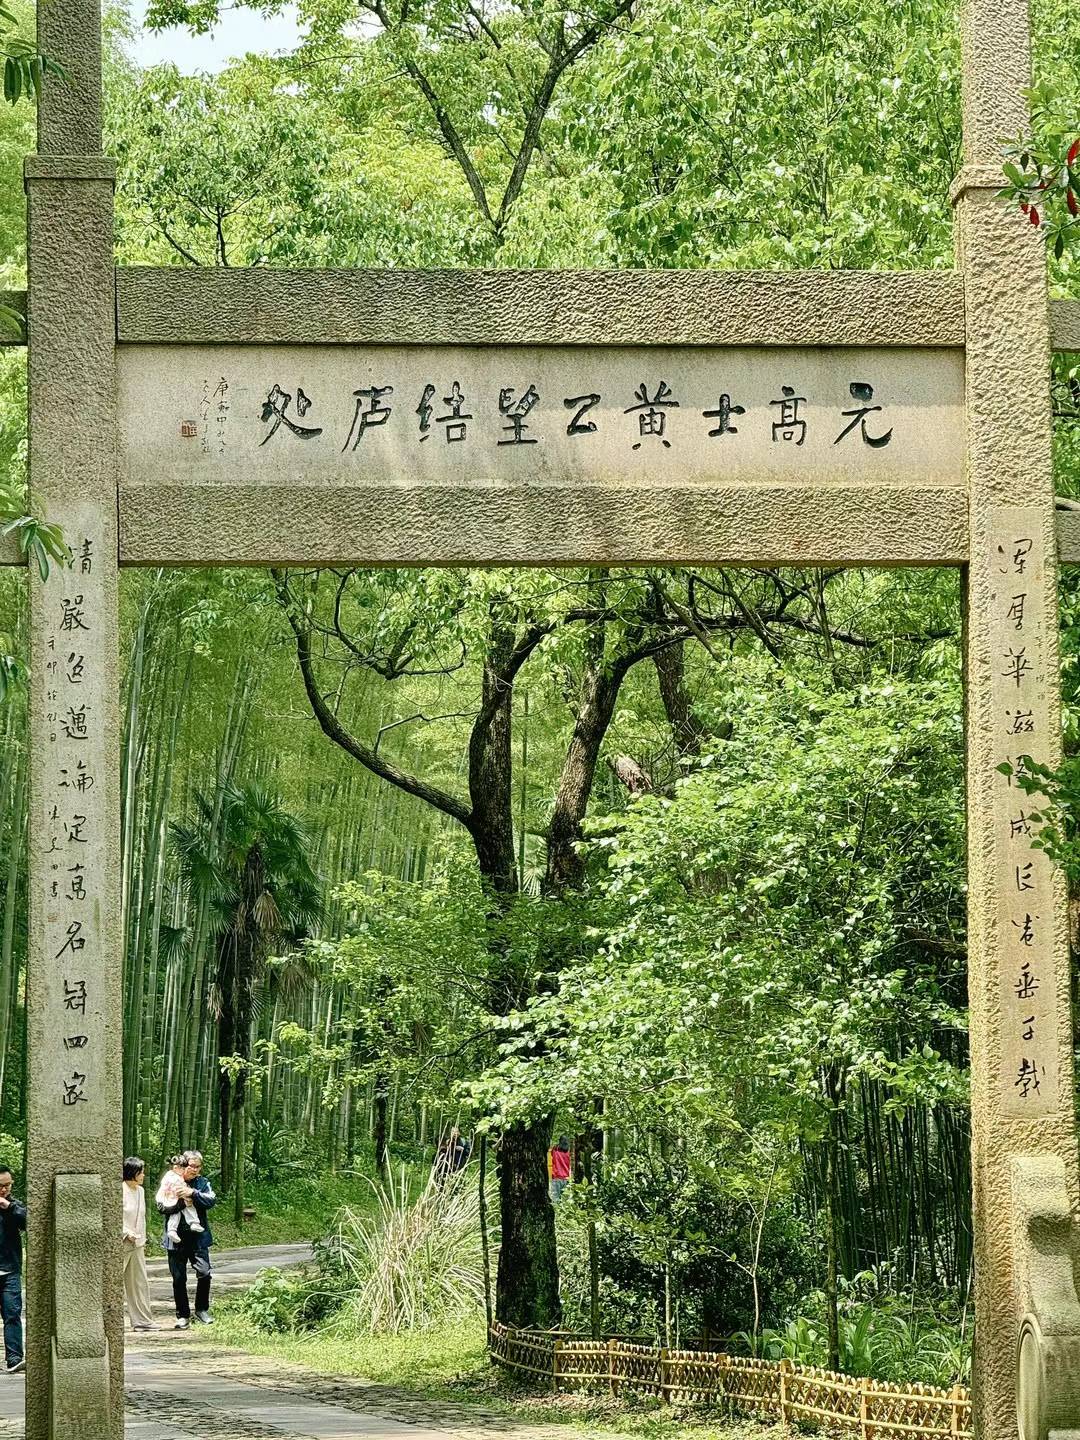 Huang Gongwang Seclusion 黄公望隐居处